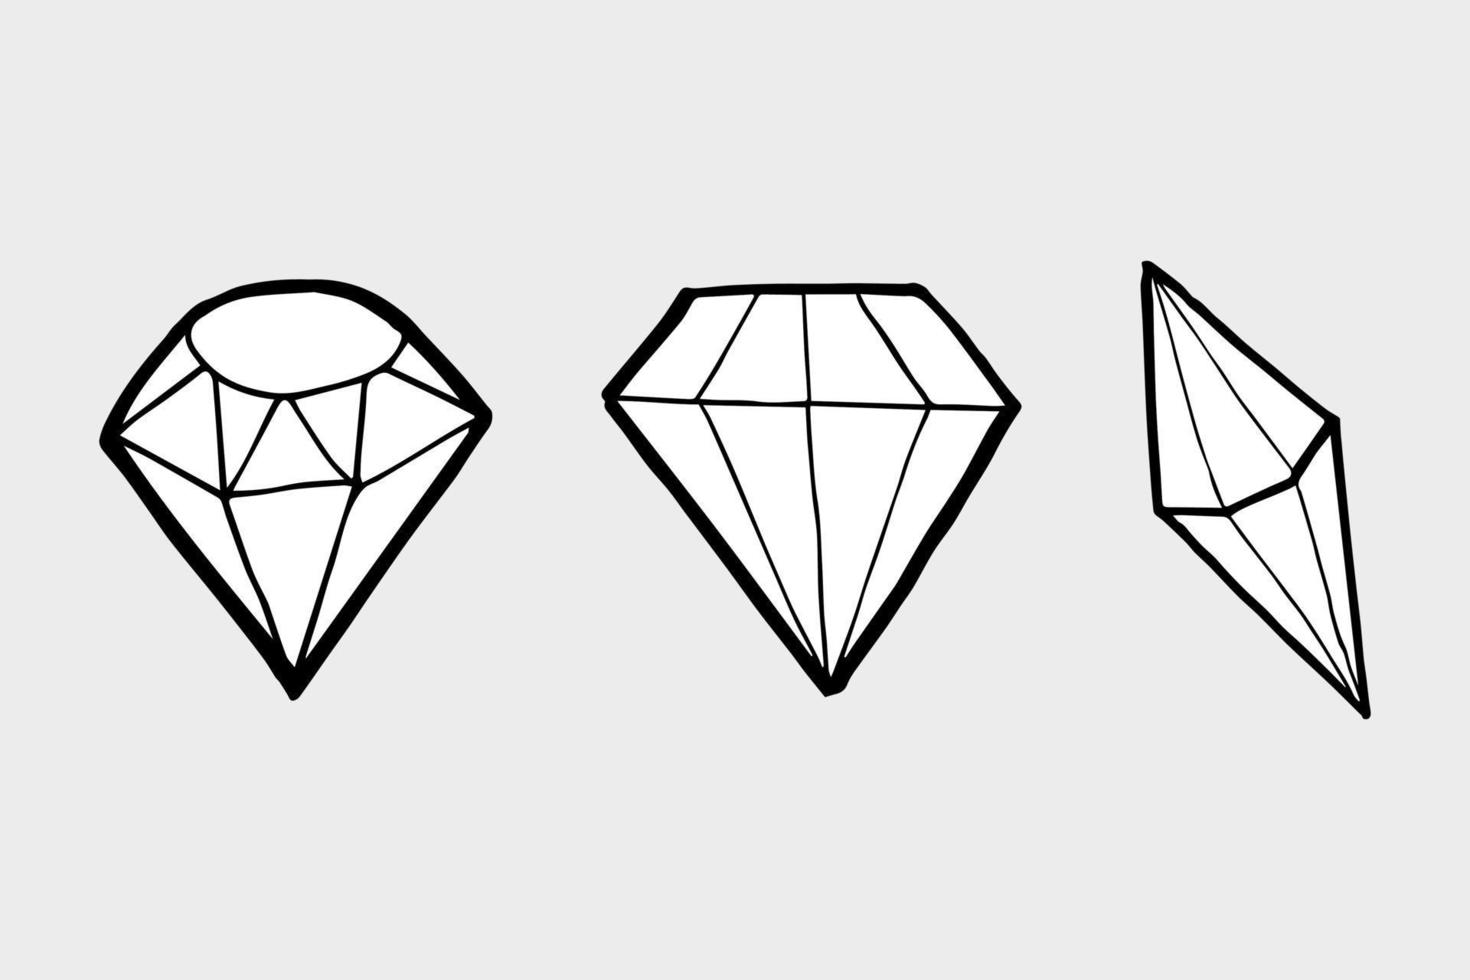 doodle hand loting diamant set, vector illutration.